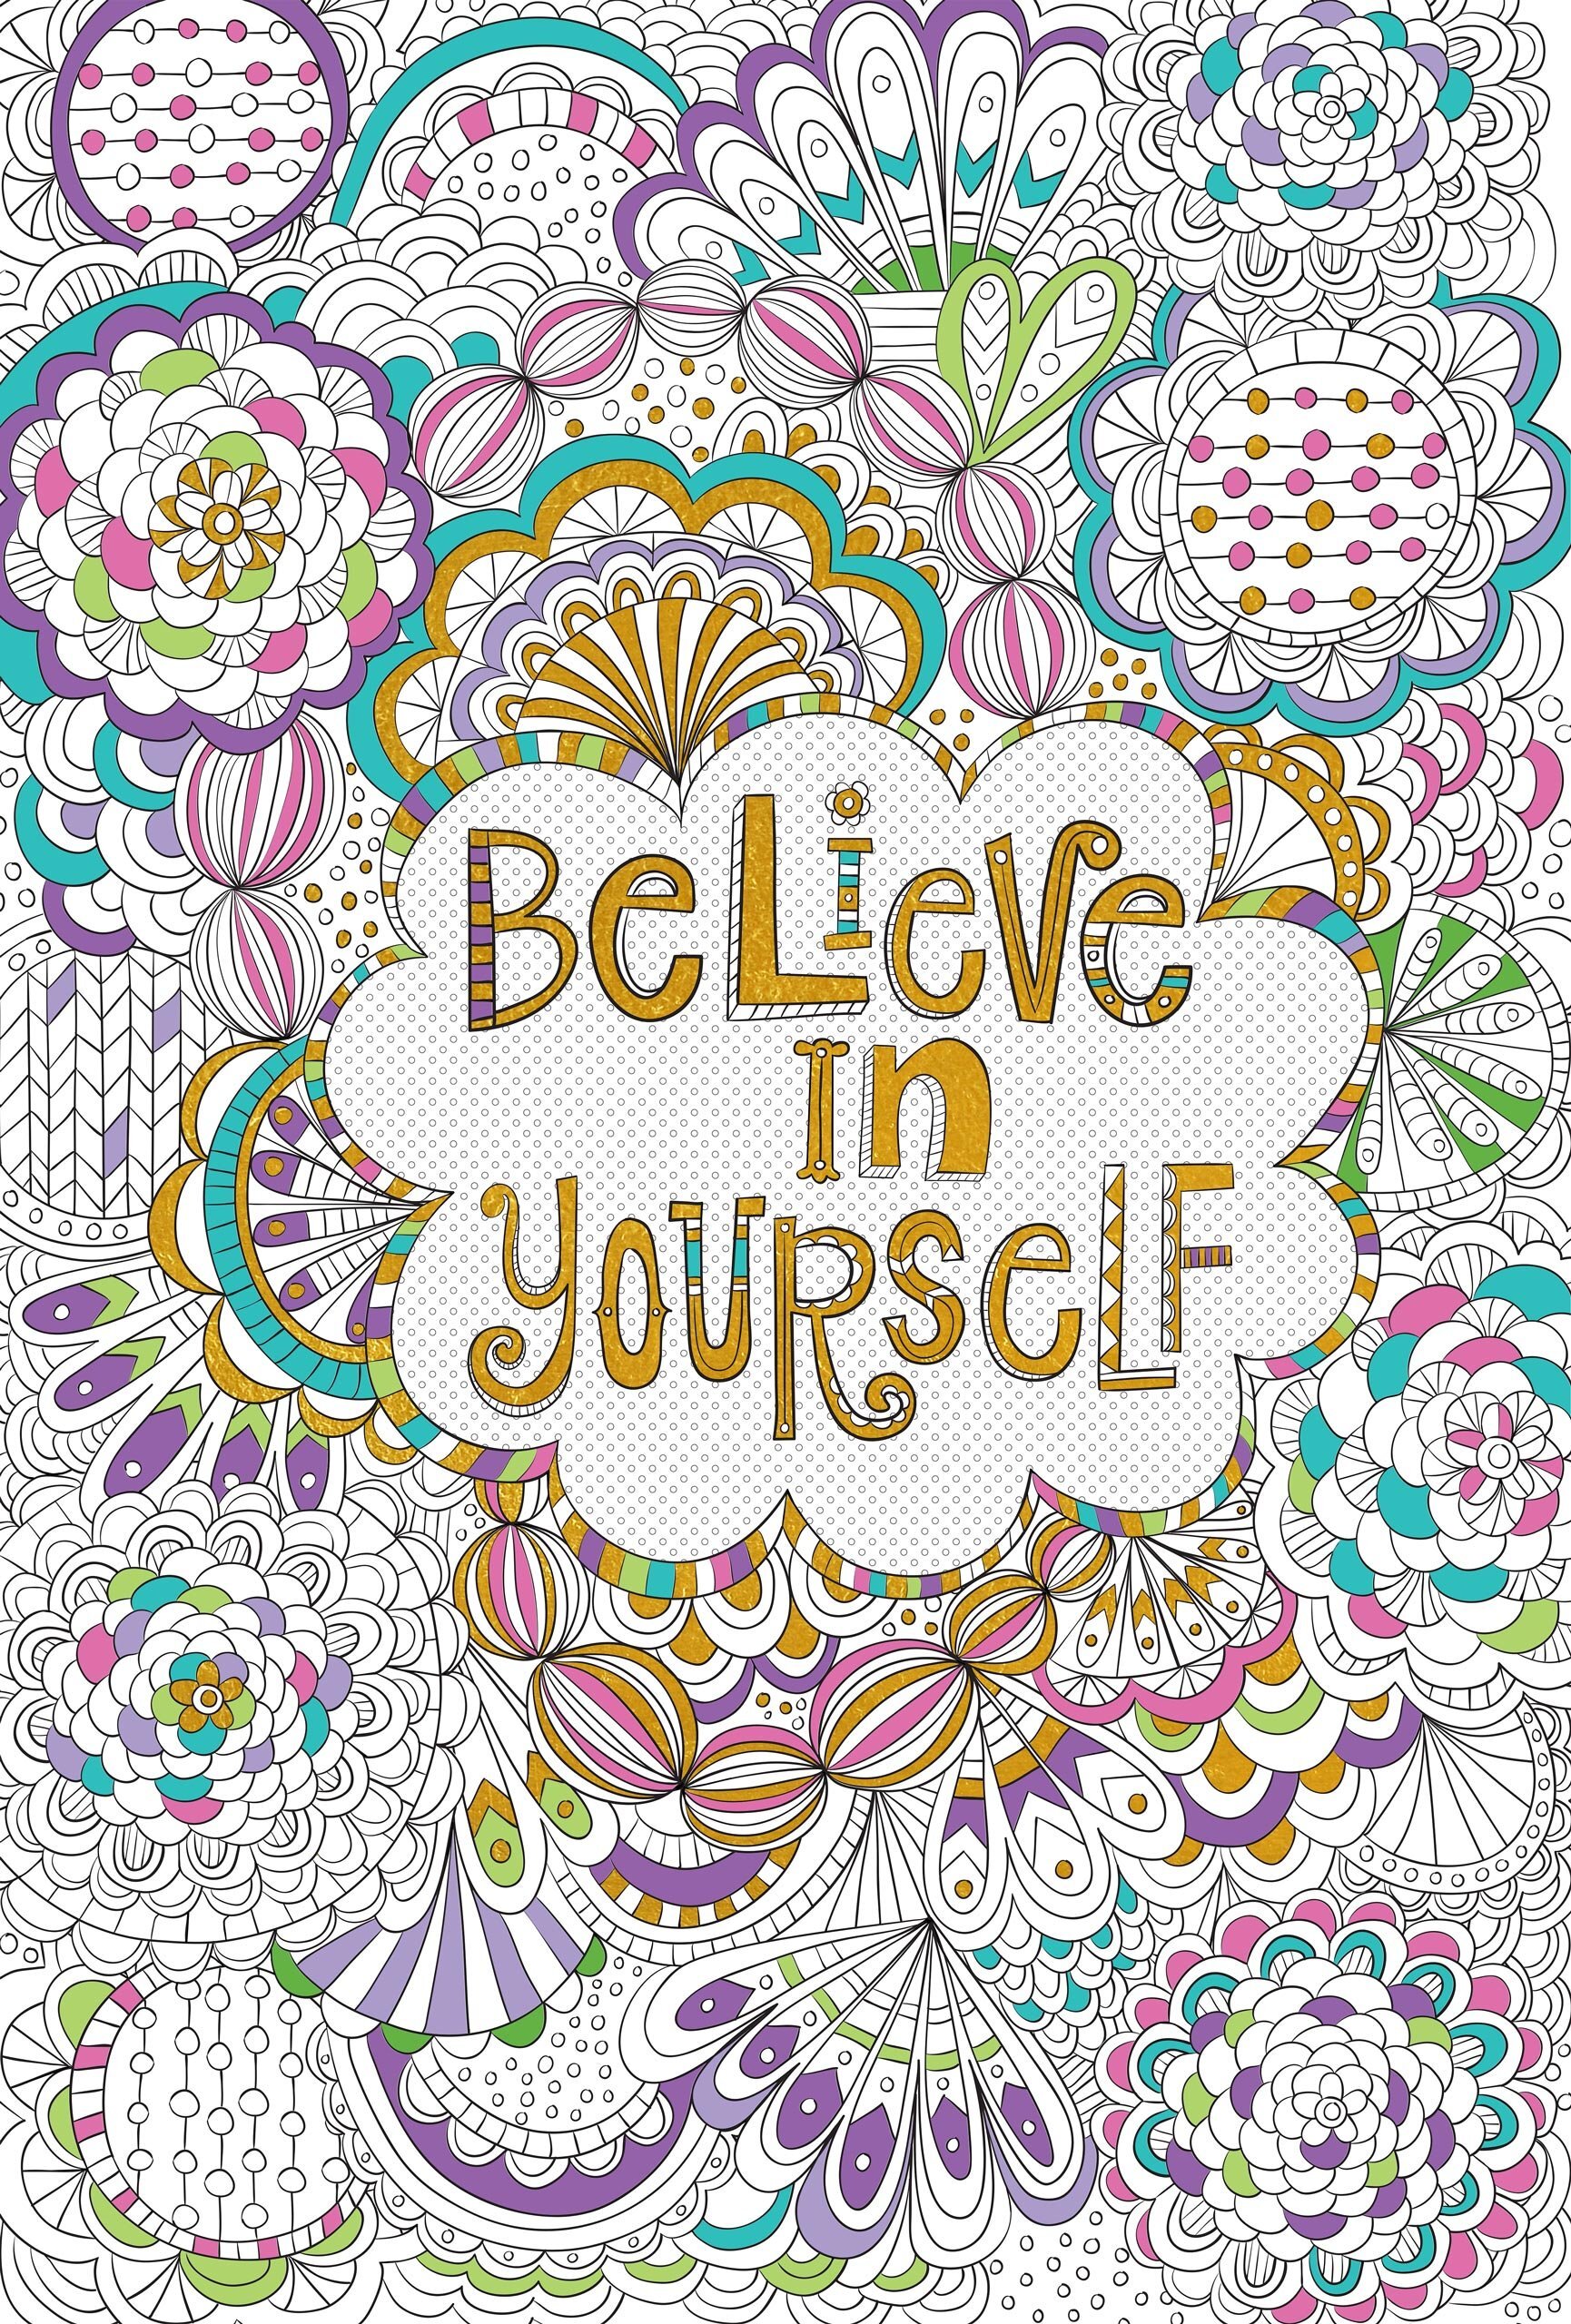 Believe in Yourself Gold Foil Coloring Poster